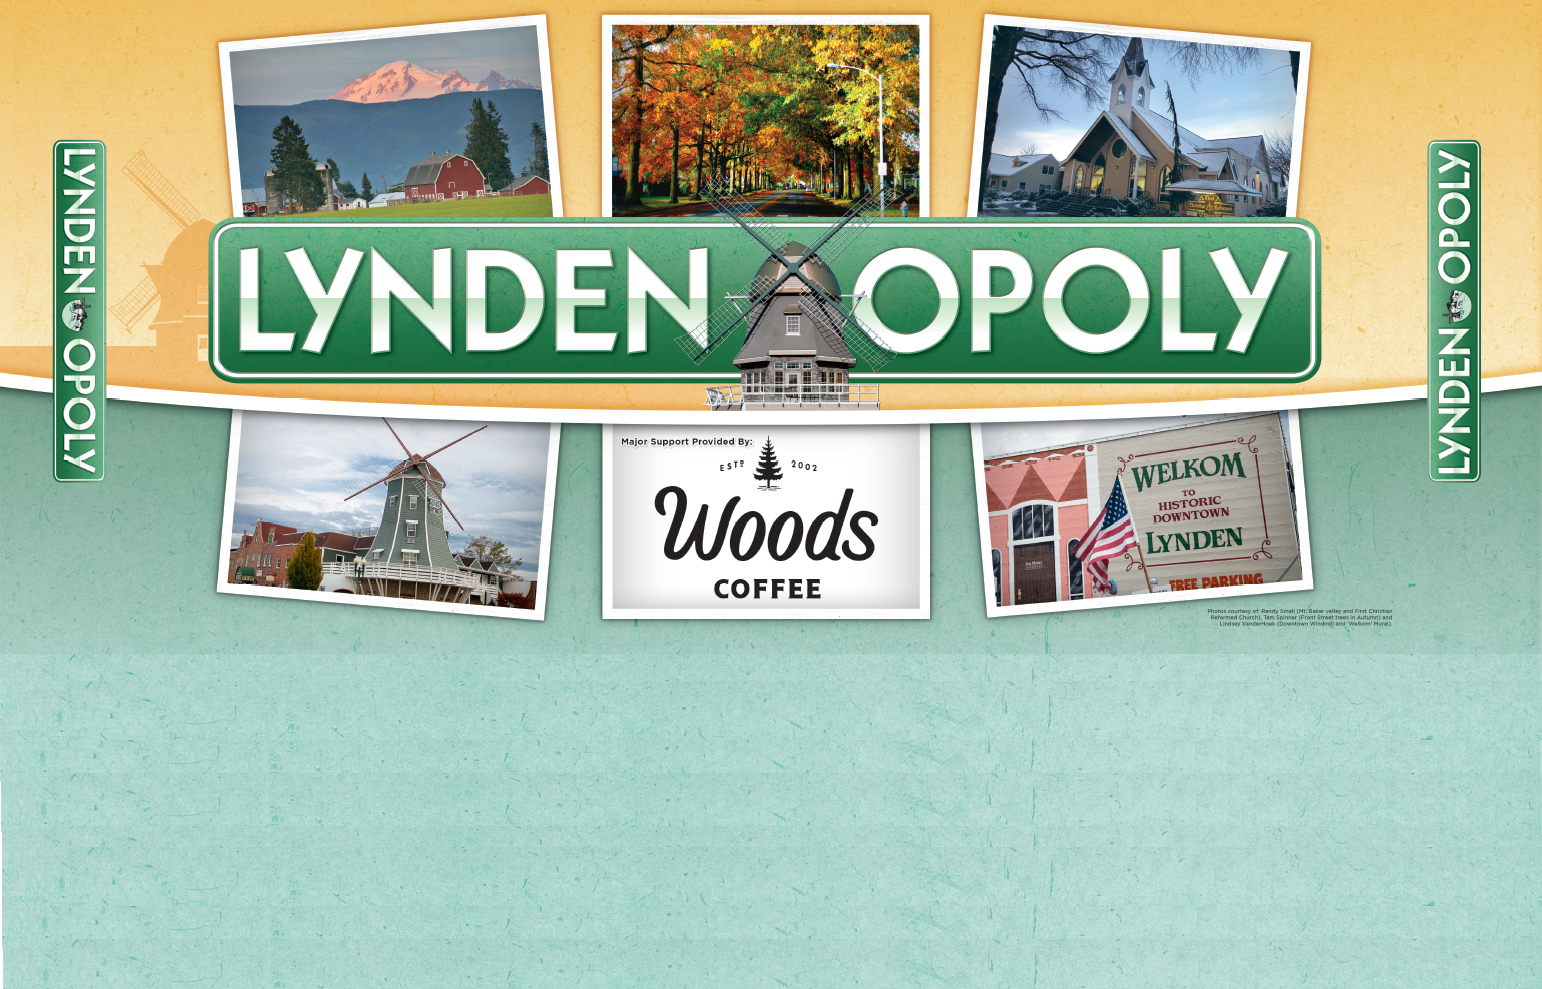 Only 2 days remain to pre-order LYNDENOPOLY! Here’s how and why: